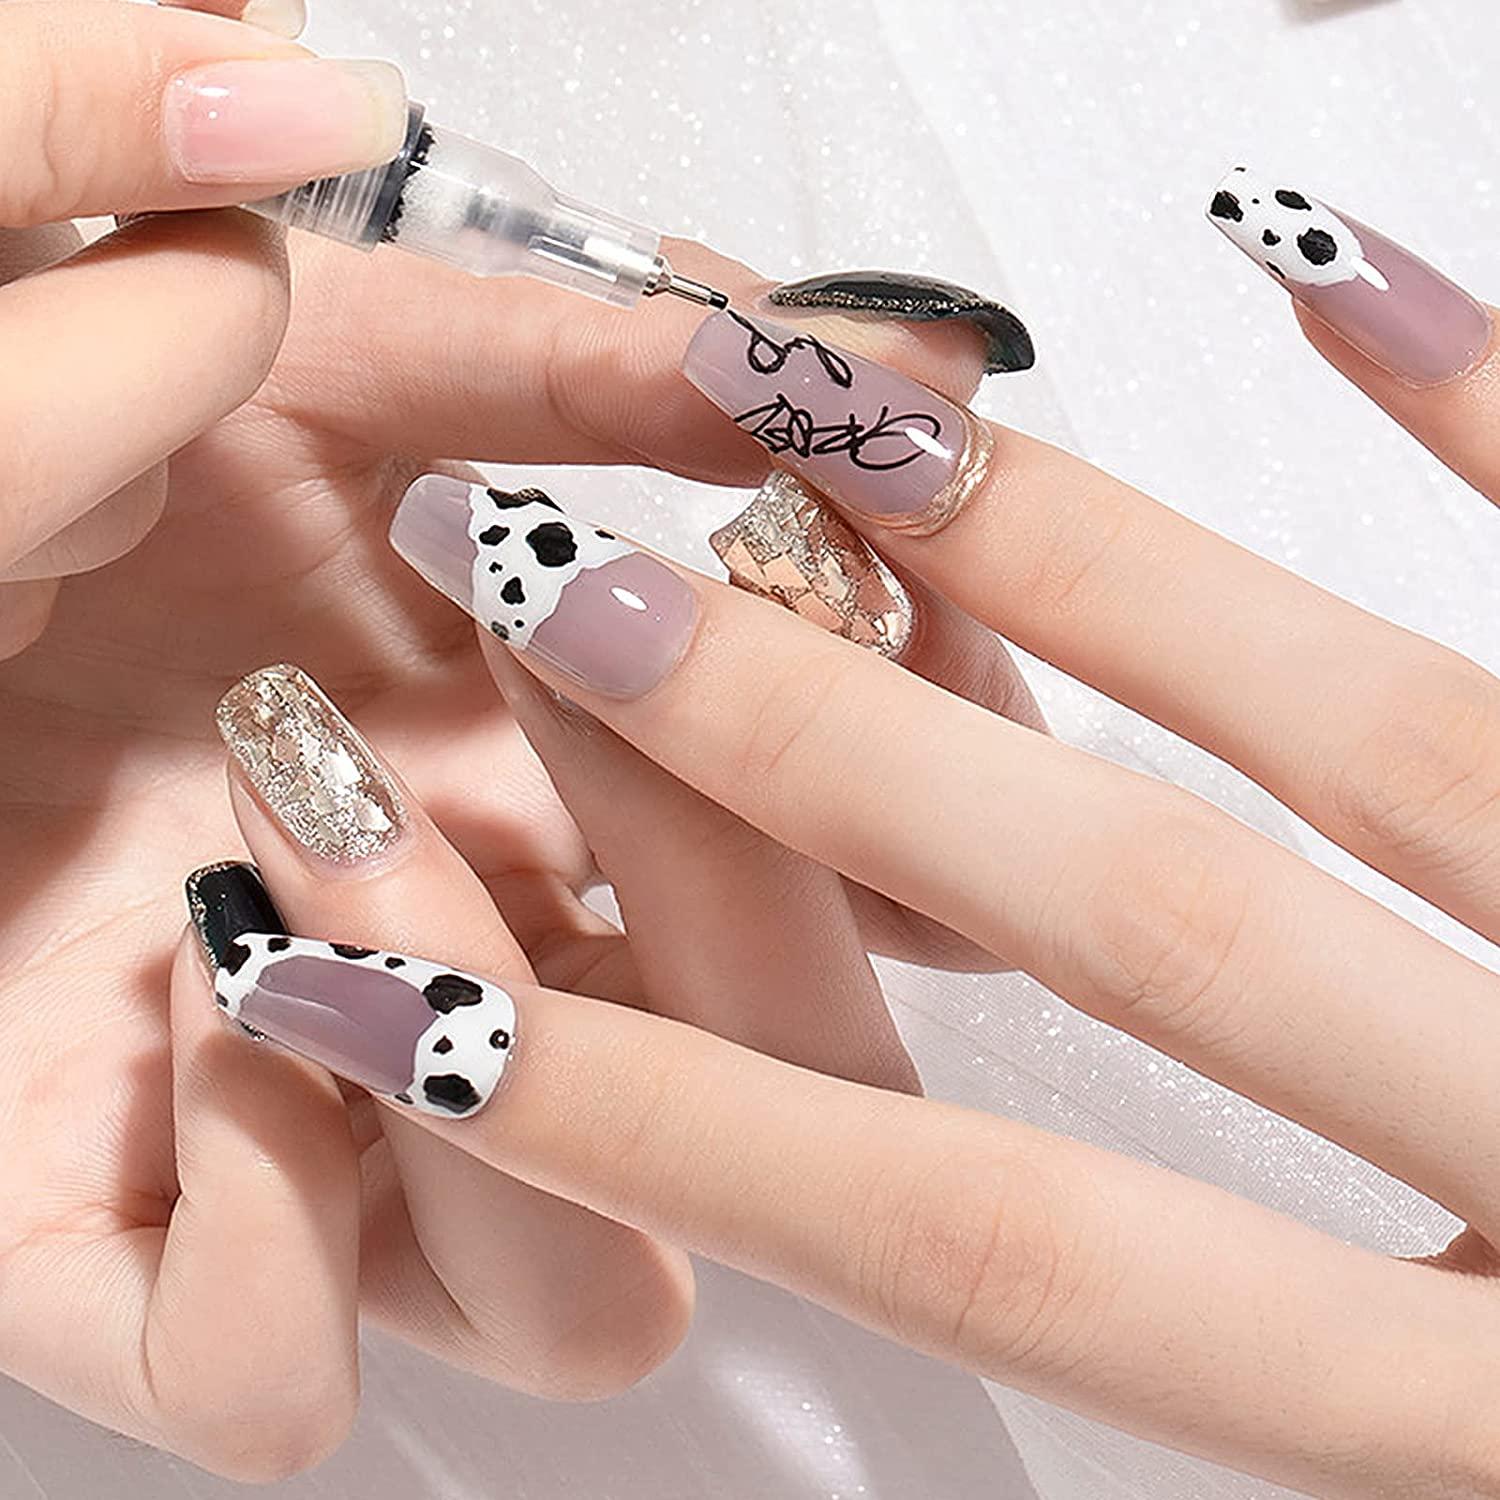 4 Nail Art Designs That Will Be Hot This Summer | American Spa